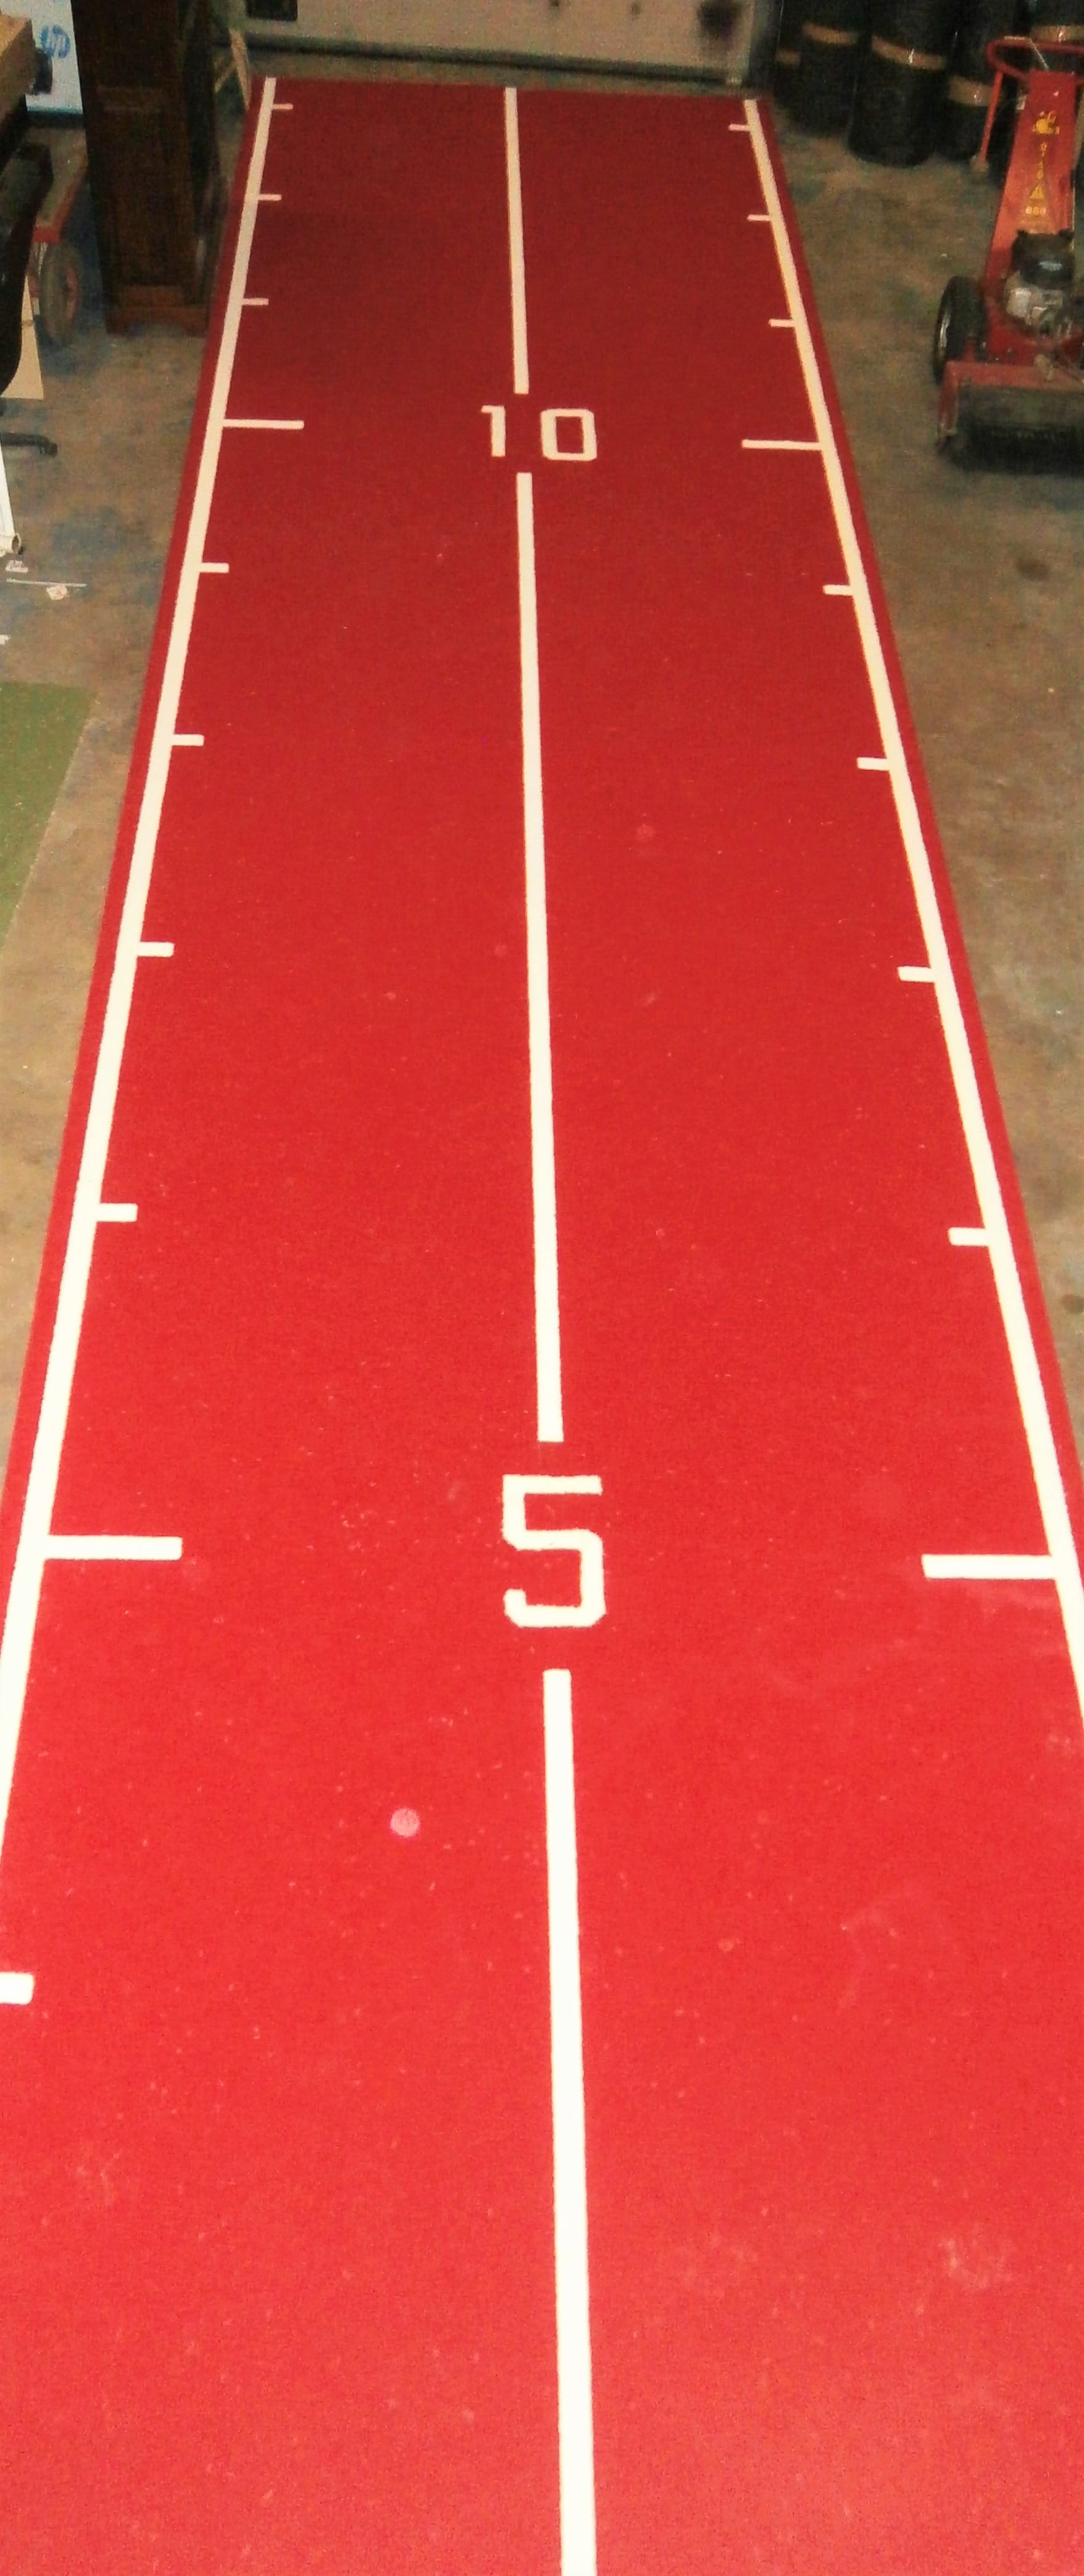 full length view of a red astroturf gym mat with white gym track markings